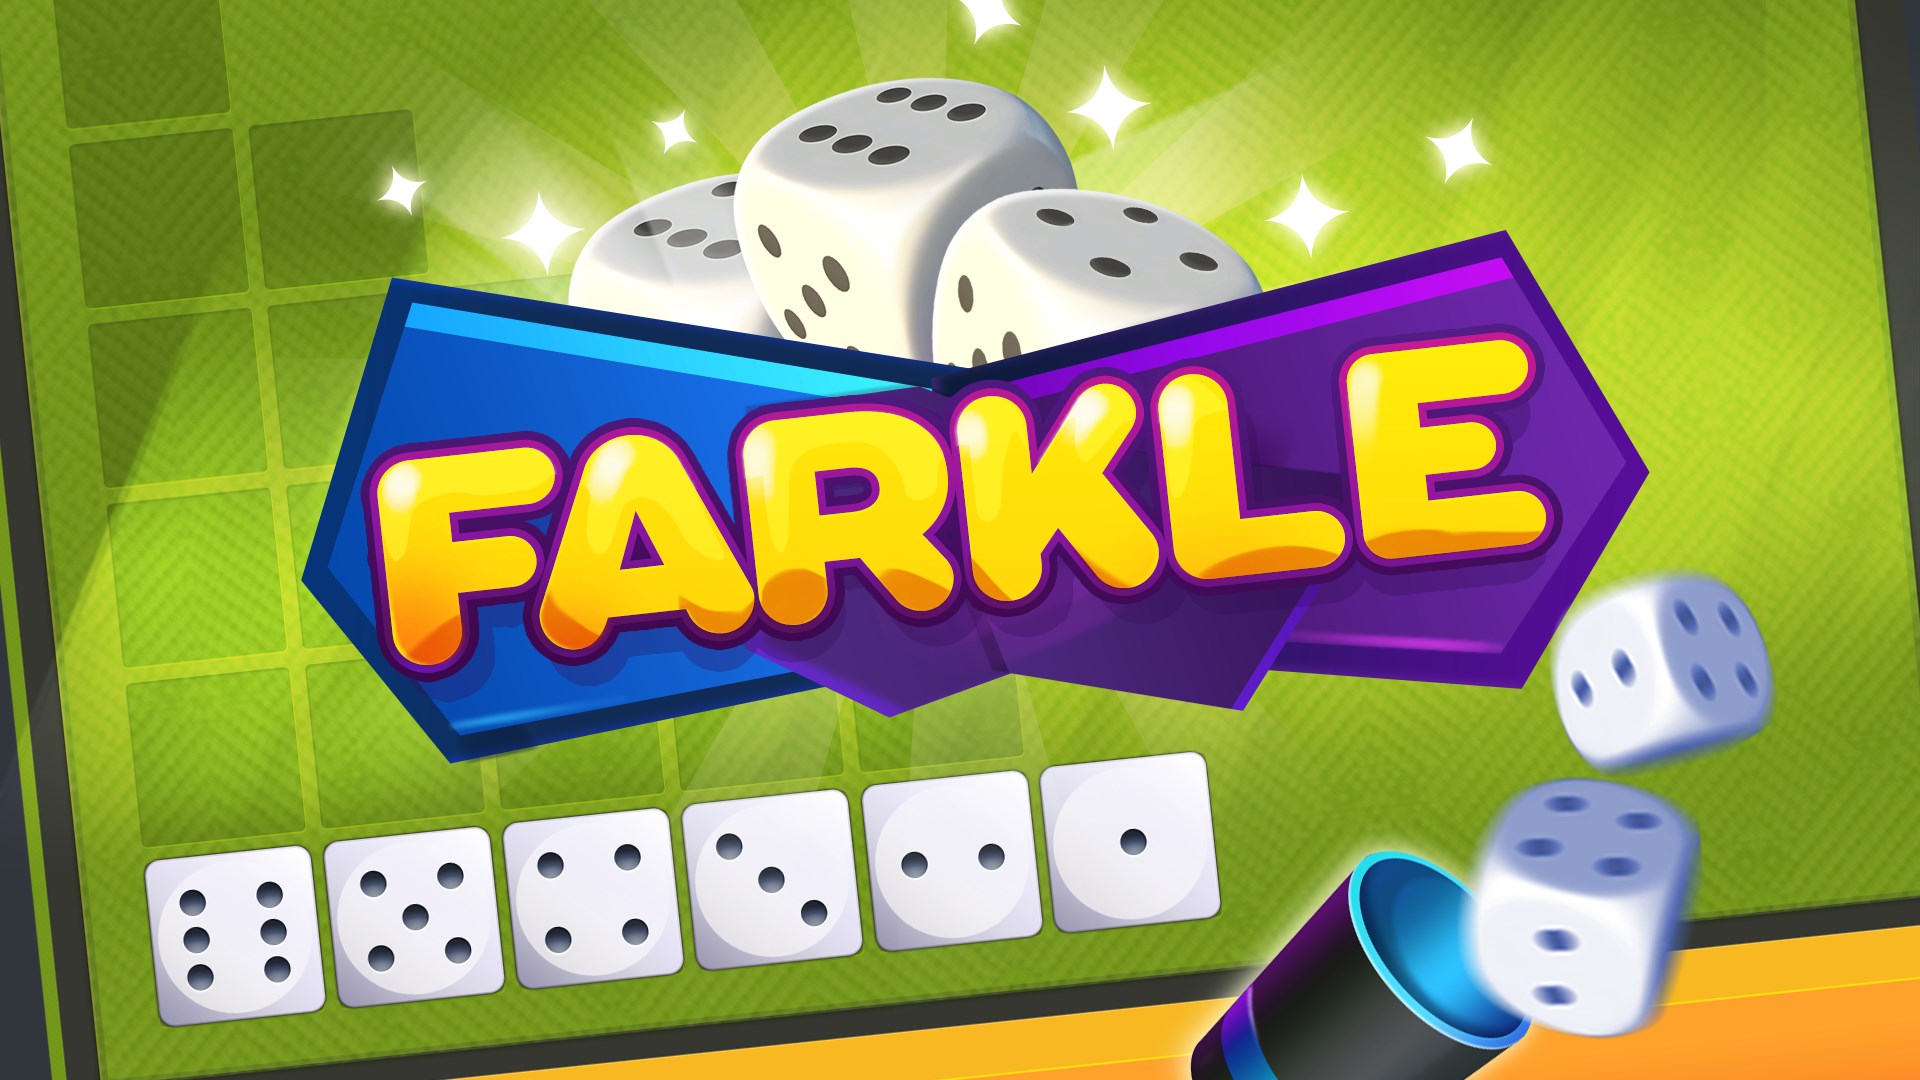 Farkle - dice games online - Apps on Google Play